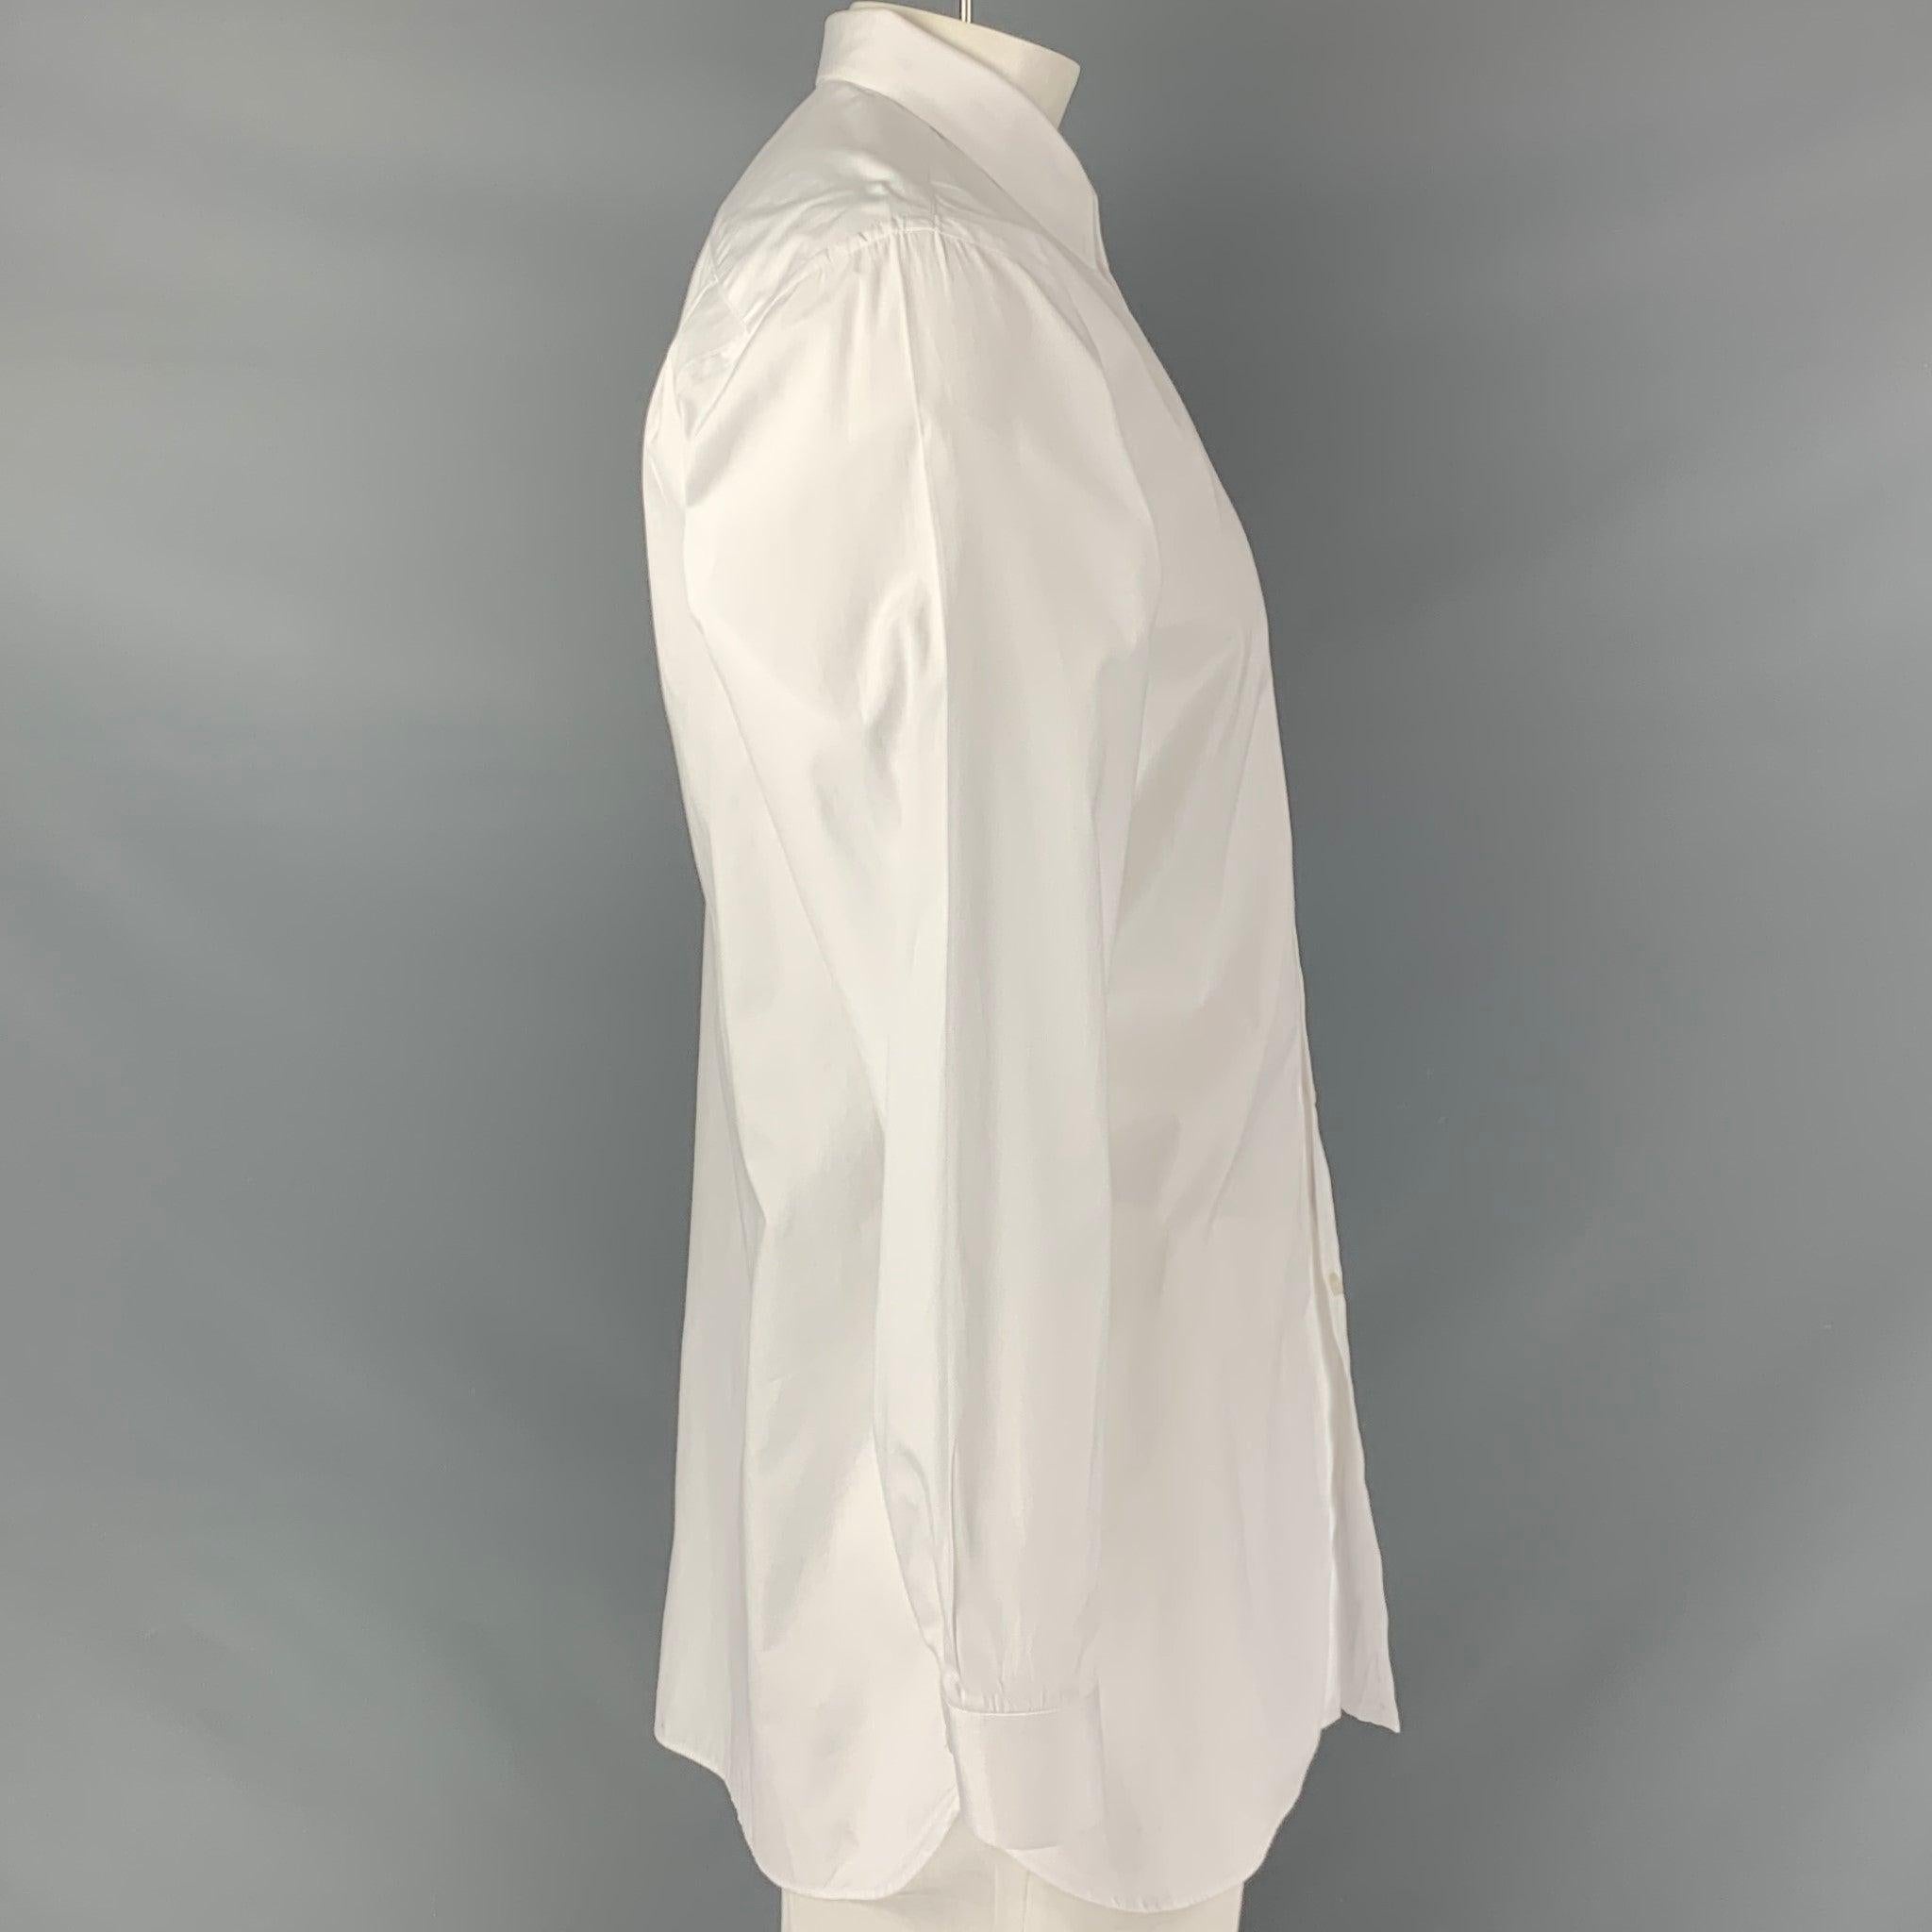 BURBERRY LONDON long sleeve shirt comes in a white cotton fabric featuring a straight collar, and a button down closure. Very Good Pre-Owned Condition. Minor signs of wear. 

Marked:   44- 17 1/2 

Measurements: 
 
Shoulder: 19 inches Chest: 46